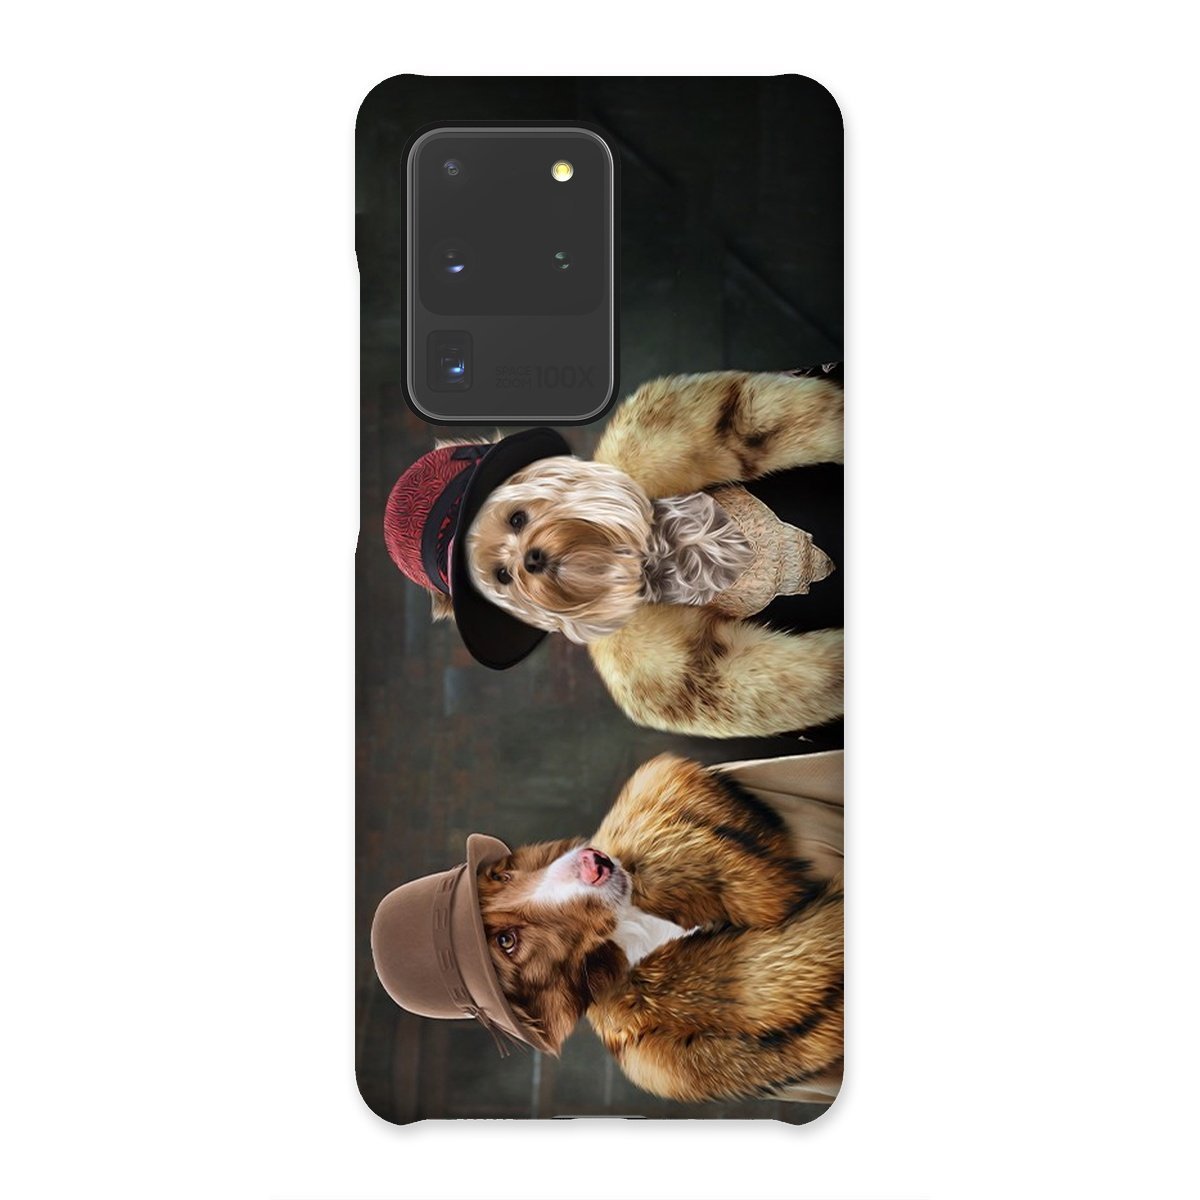 The Women (Peaky Blinders Inspired) 2 Pet: Custom Pet Phone Case - Paw & Glory - paw and glory, puppy phone case, personalised iphone 11 case dogs, personalised dog phone case, phone case dog, personalised pet phone case, puppy phone case, Pet Portrait phone case,